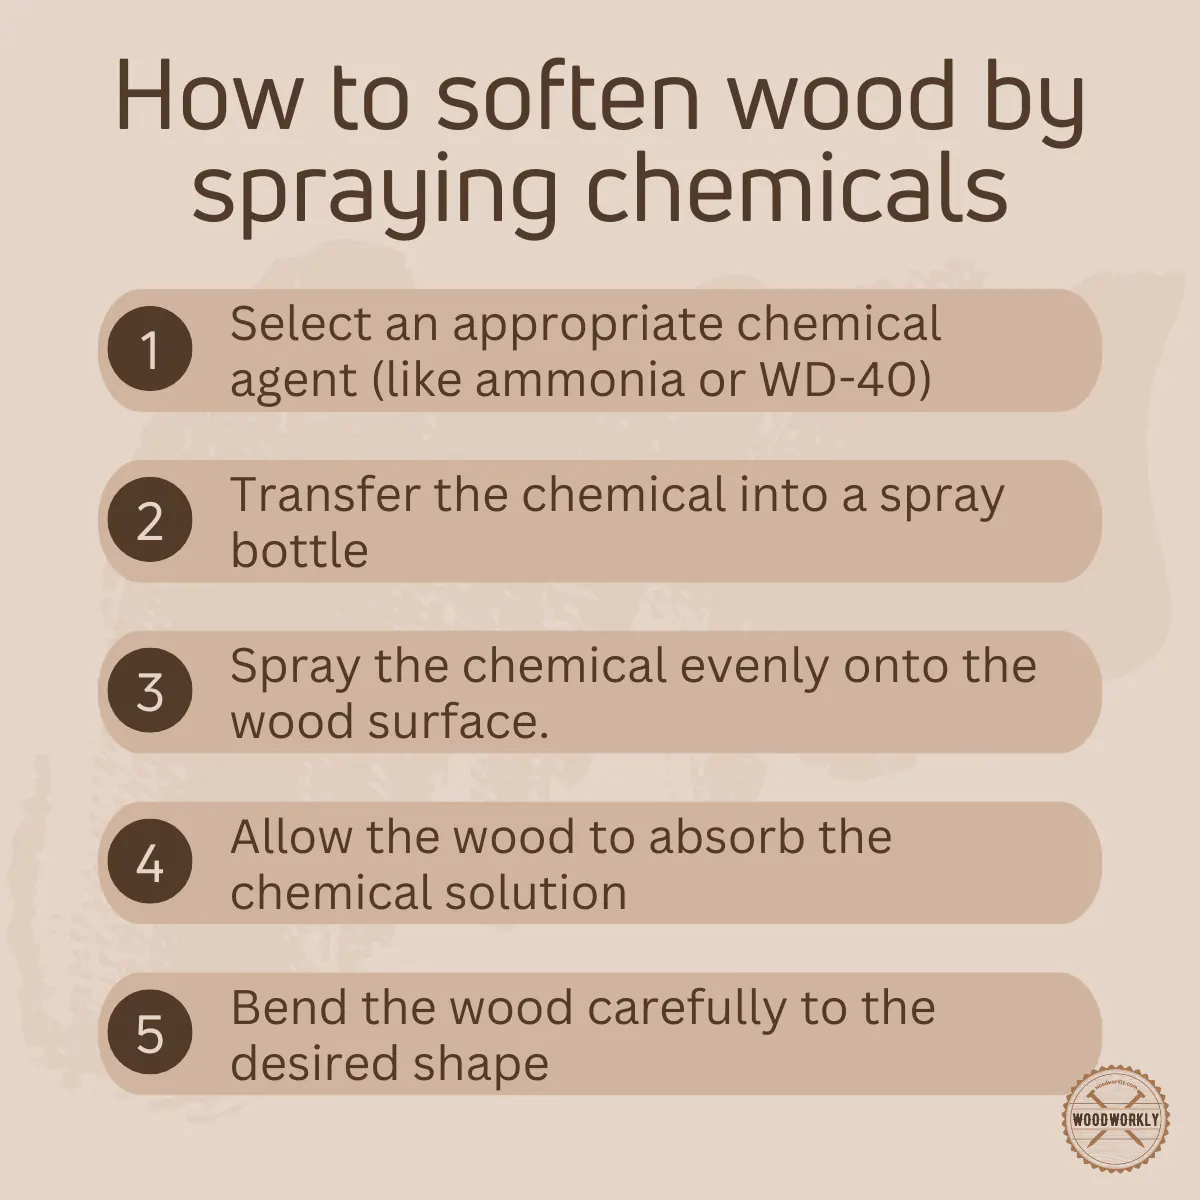 How to soften wood by spraying chemicals